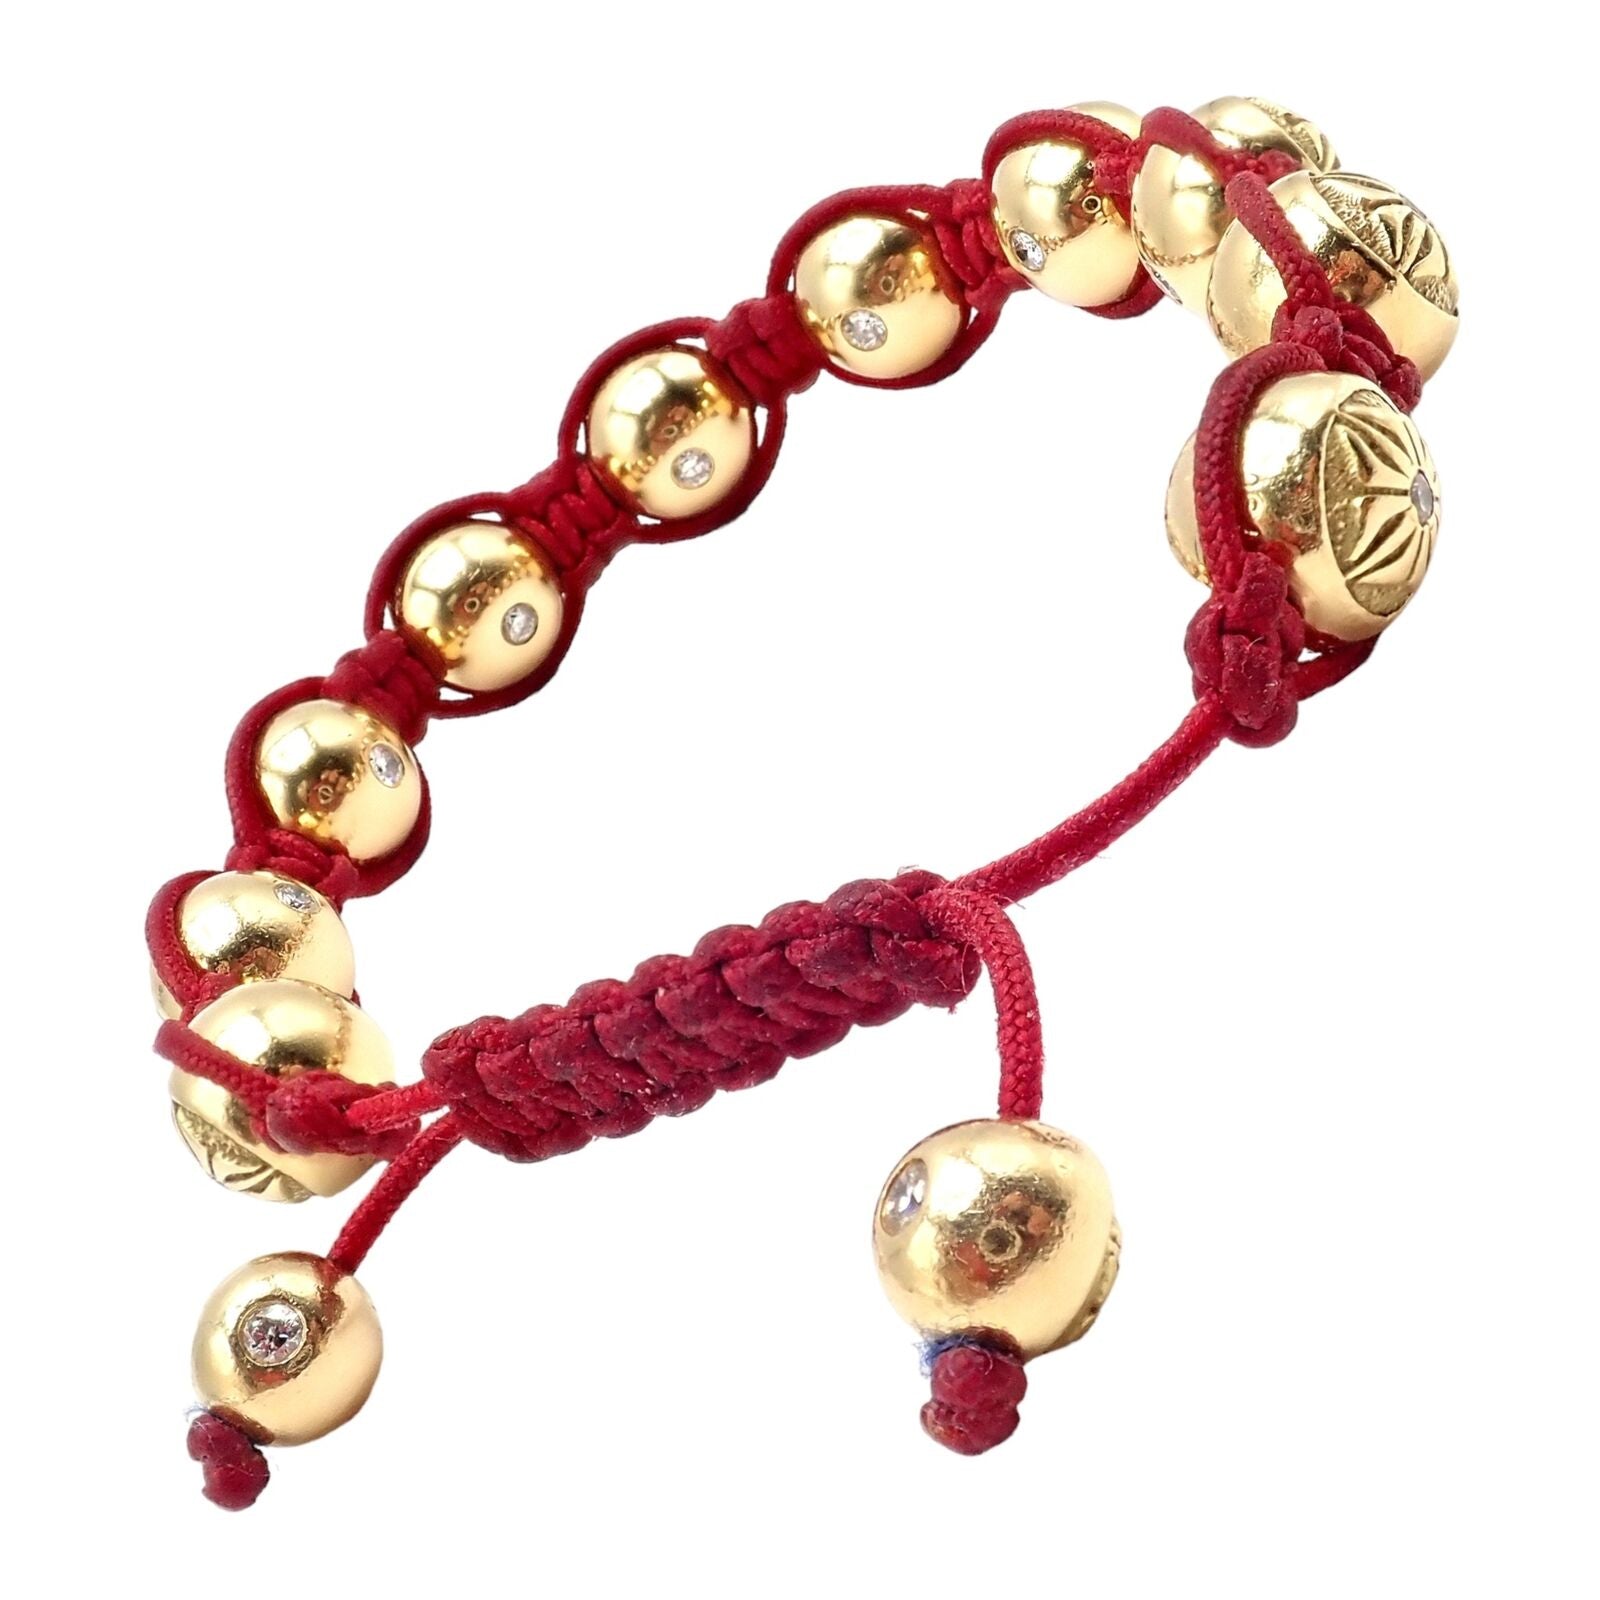 Red Shamballa Bracelet With Tube Shaped Beads Make Your Day